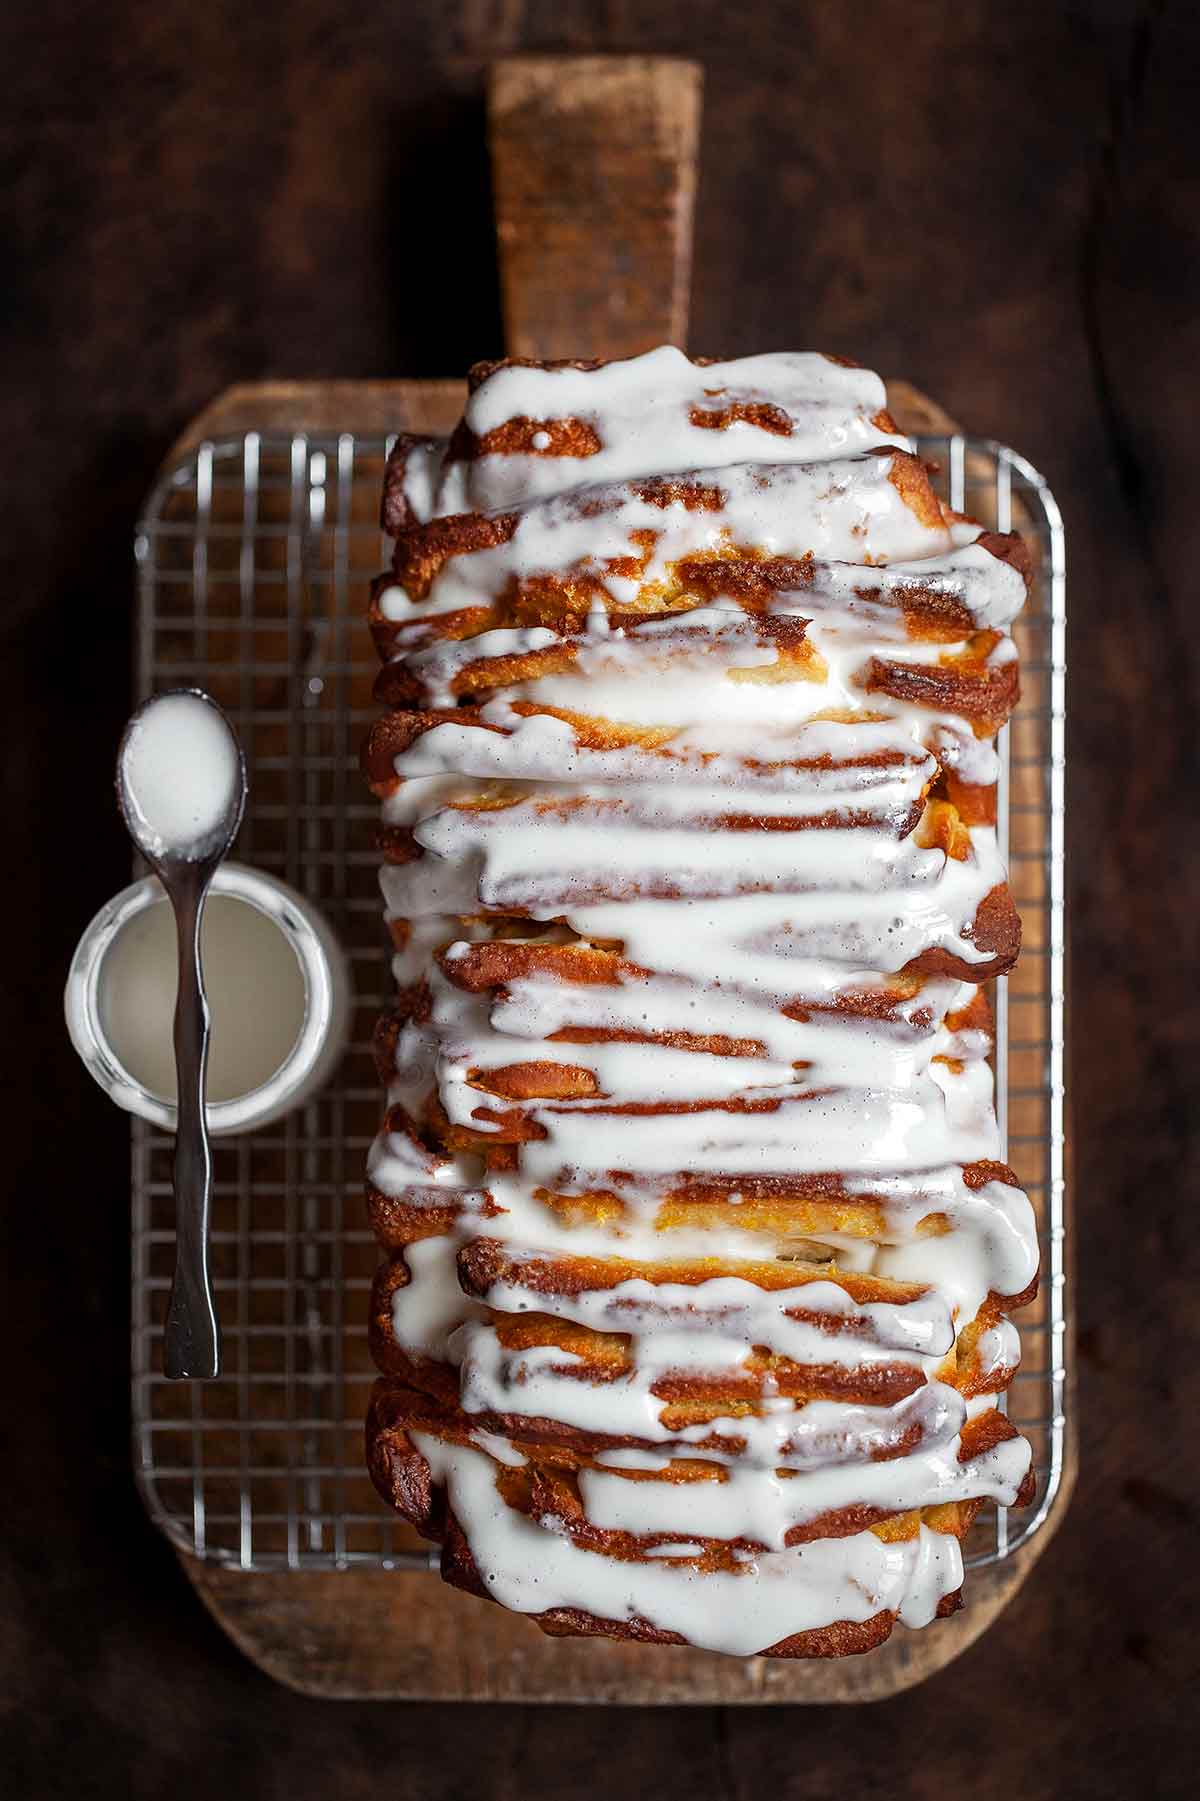 A glazed lemon pull-apart coffee cake on a wire rack with a spoon and jar of glaze beside it, all resting on a wooden cutting board.